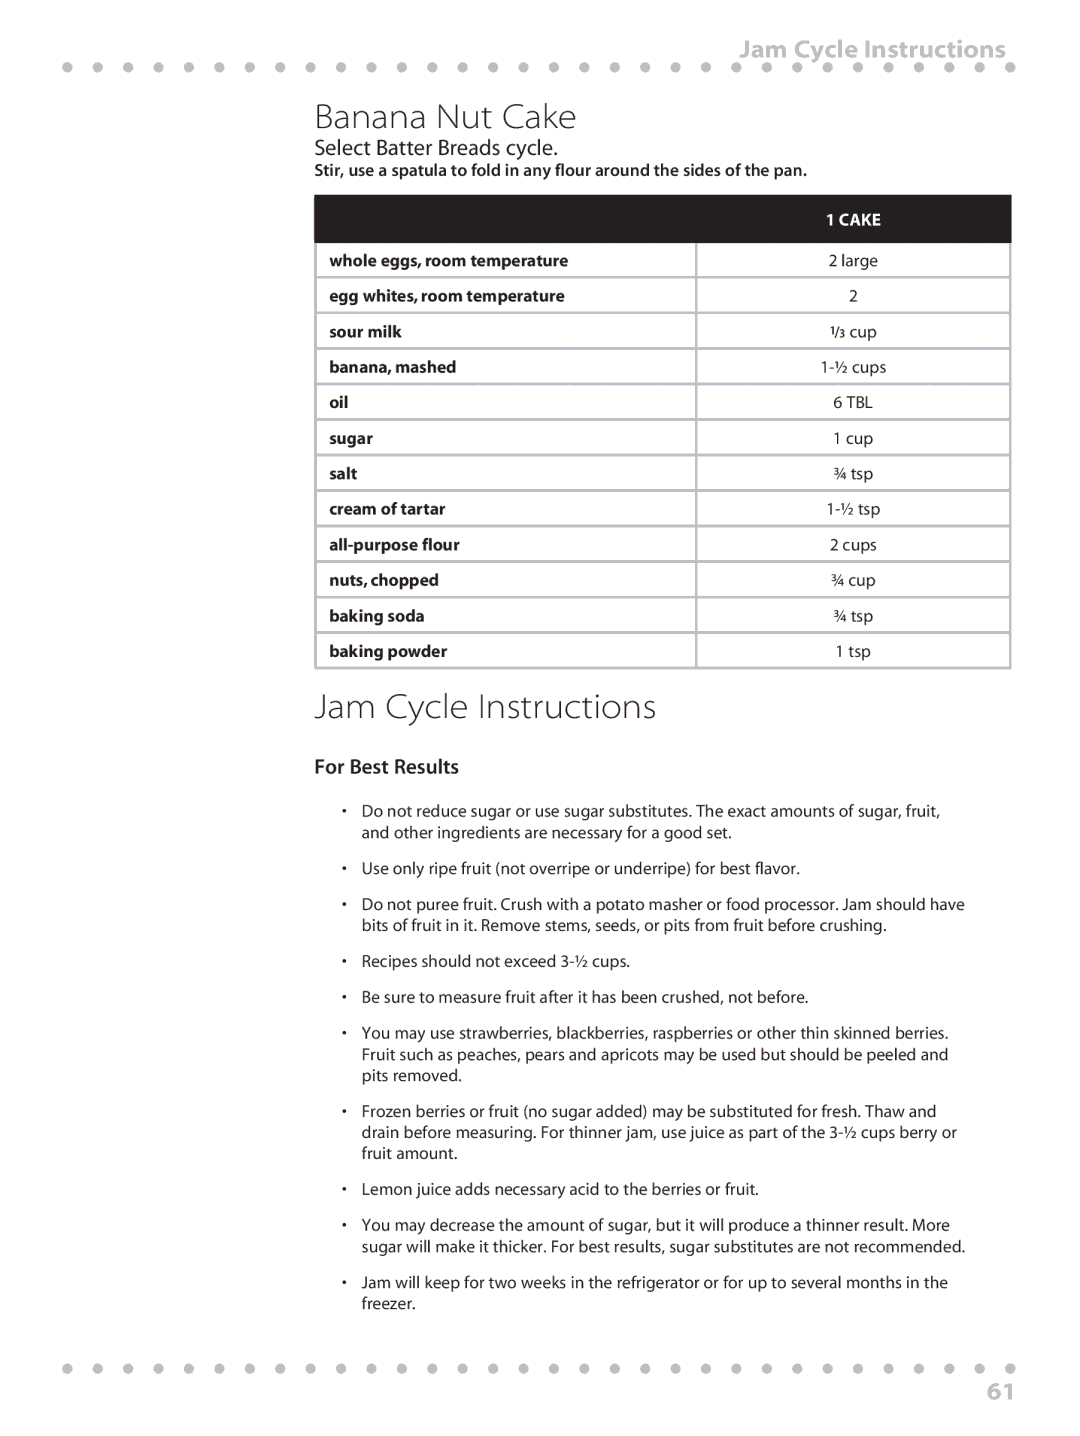 Toastmaster WBYBM1 manual Banana Nut Cake, Jam Cycle Instructions, For Best Results 